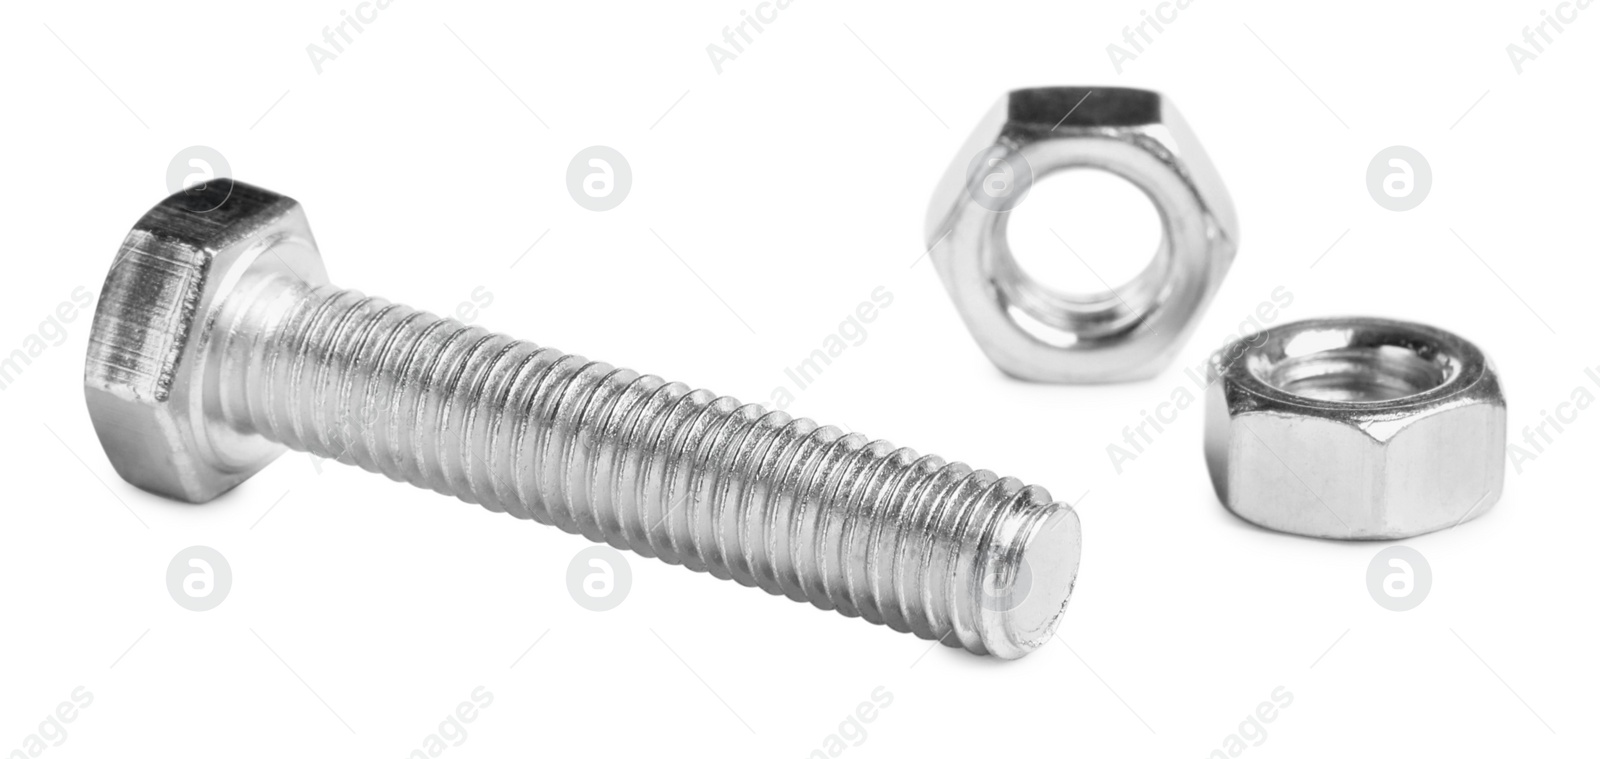 Photo of Metal bolt with hex nuts on white background